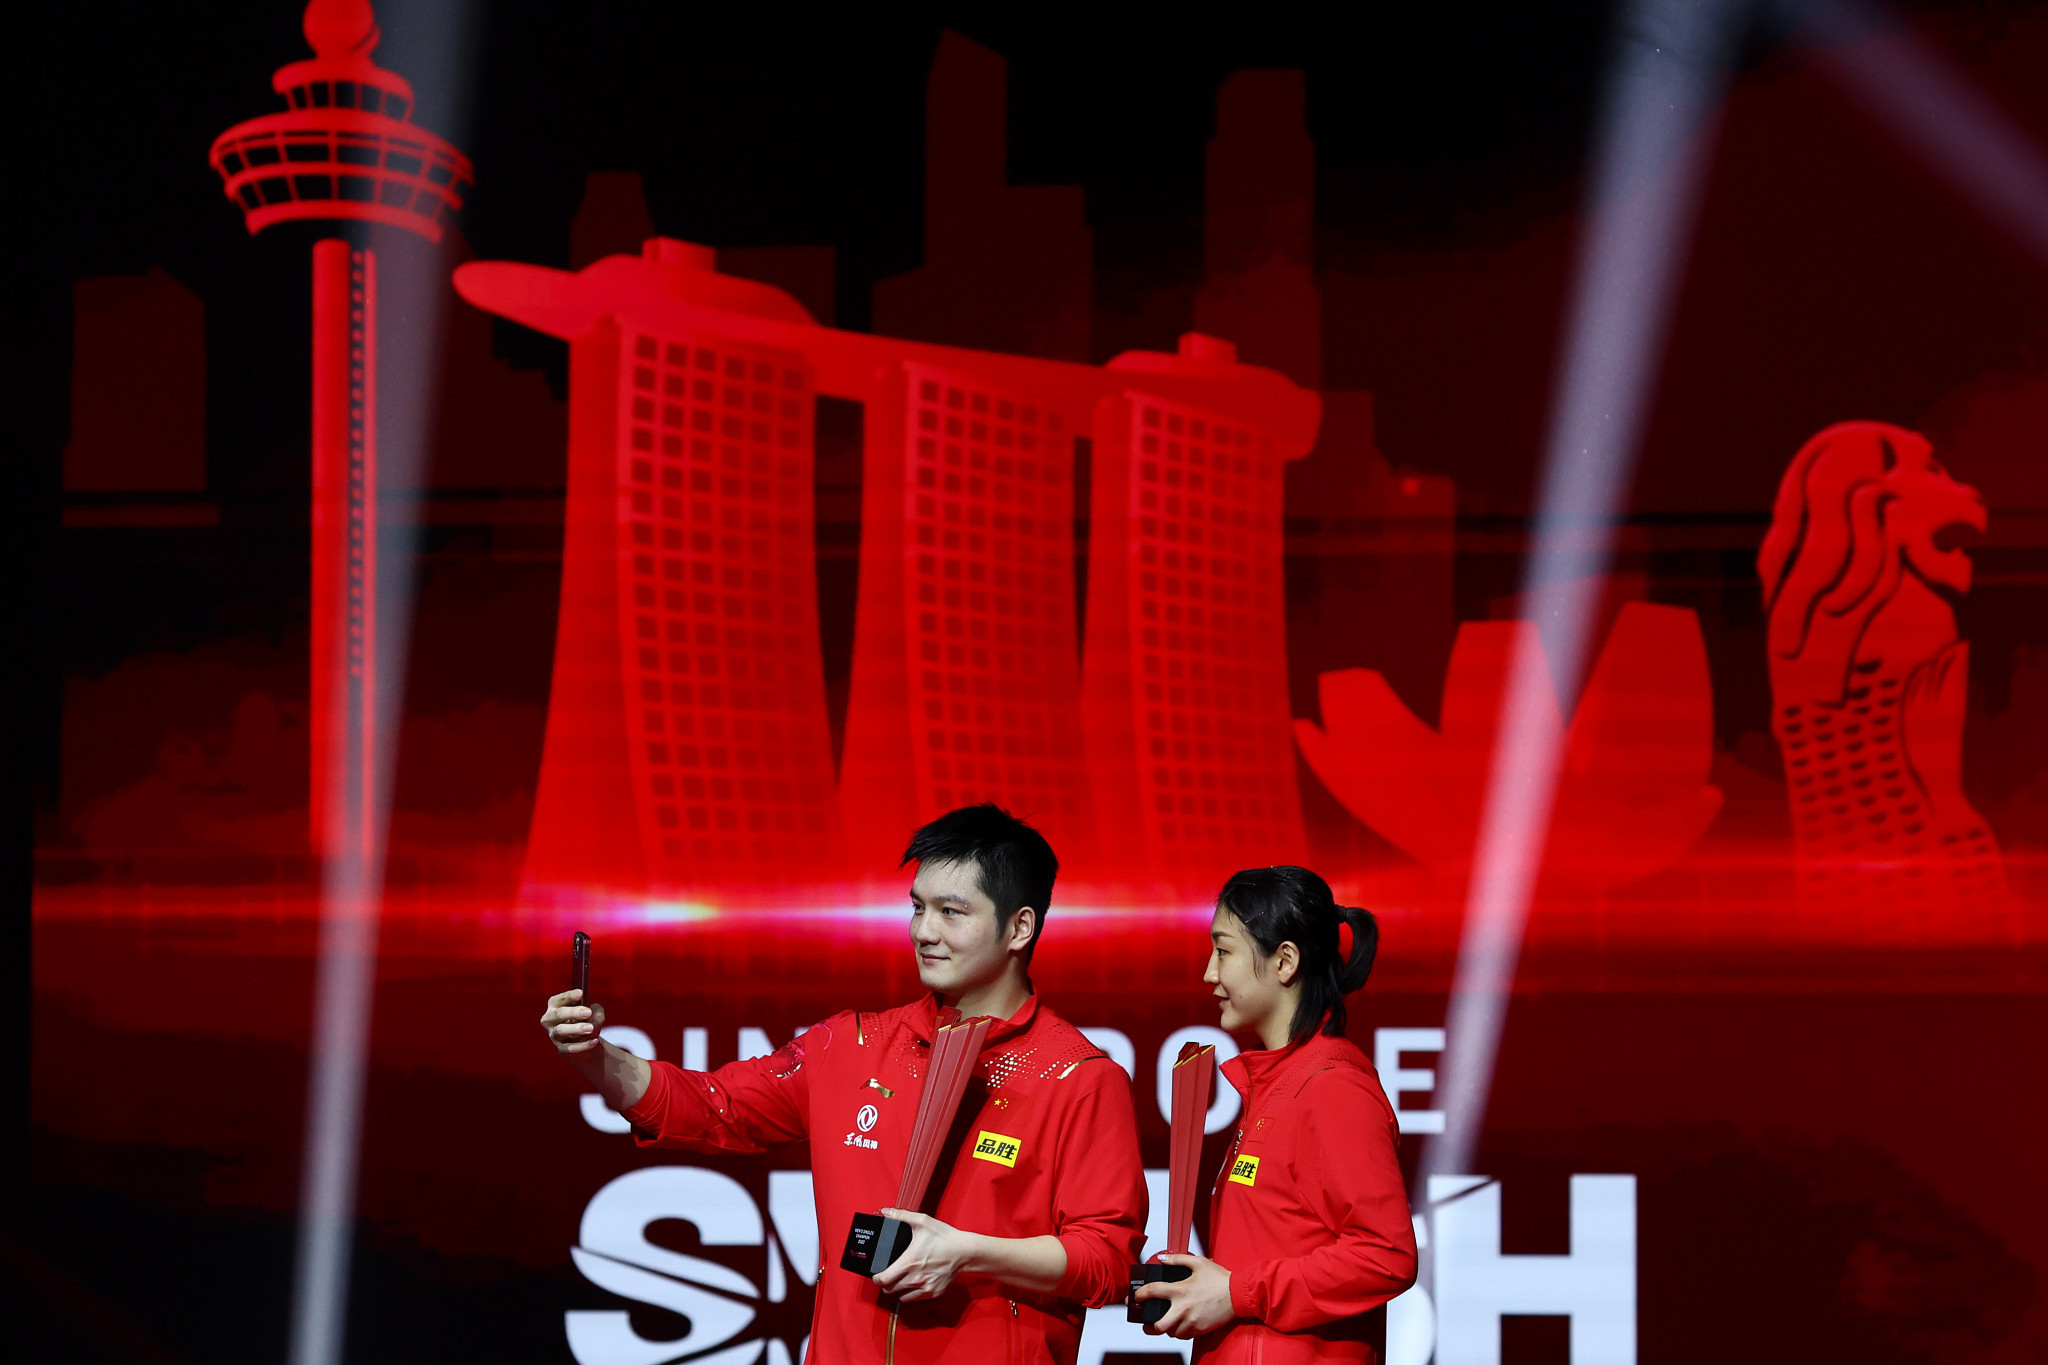 World Table Tennis hails reach of inaugural Singapore Smash competition